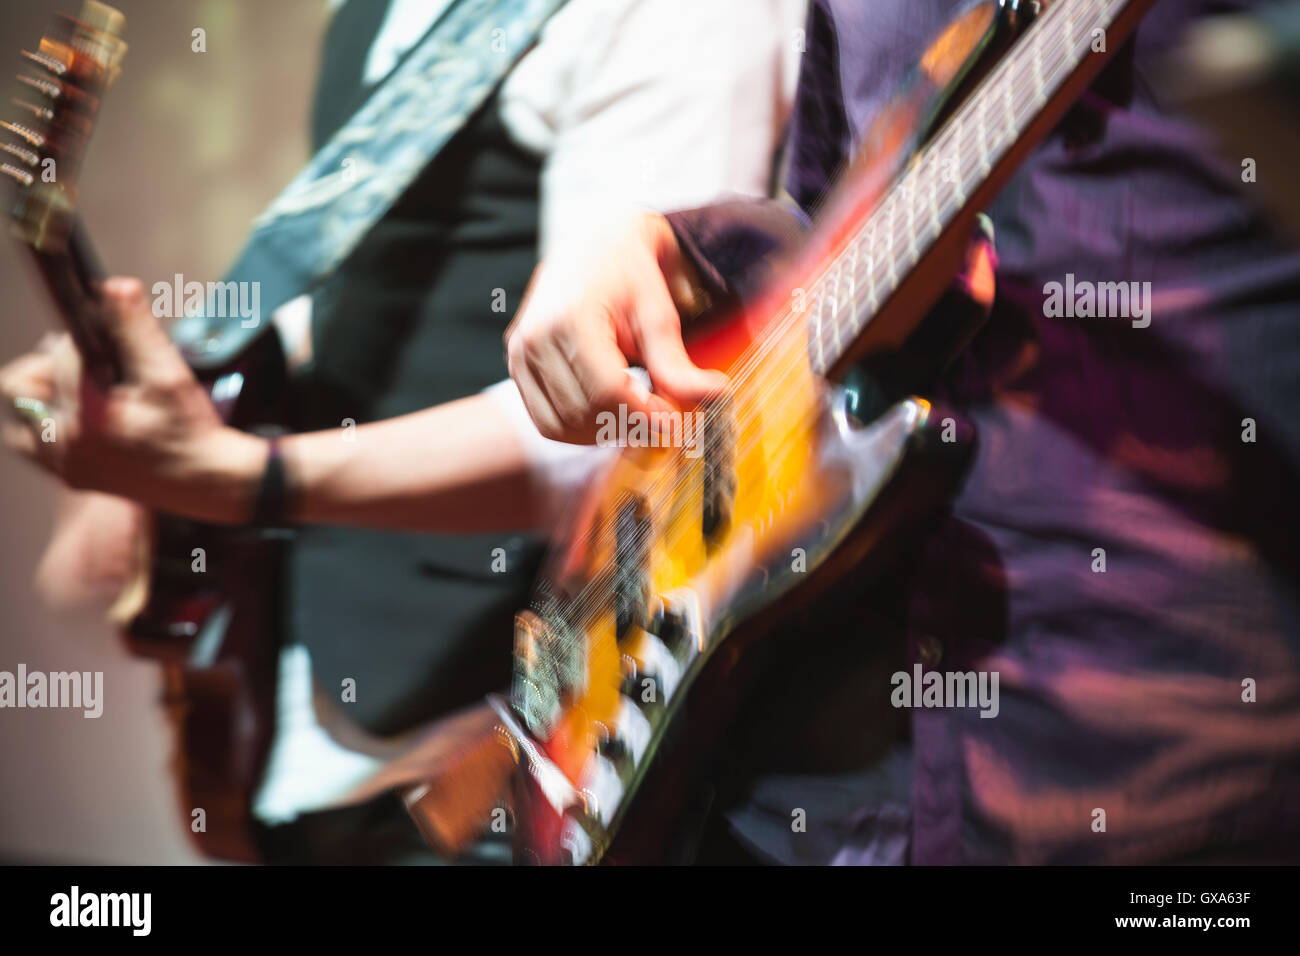 Old style rock music background, guitar players on a stage with colorful illumination, blurred photo with selective focus and re Stock Photo